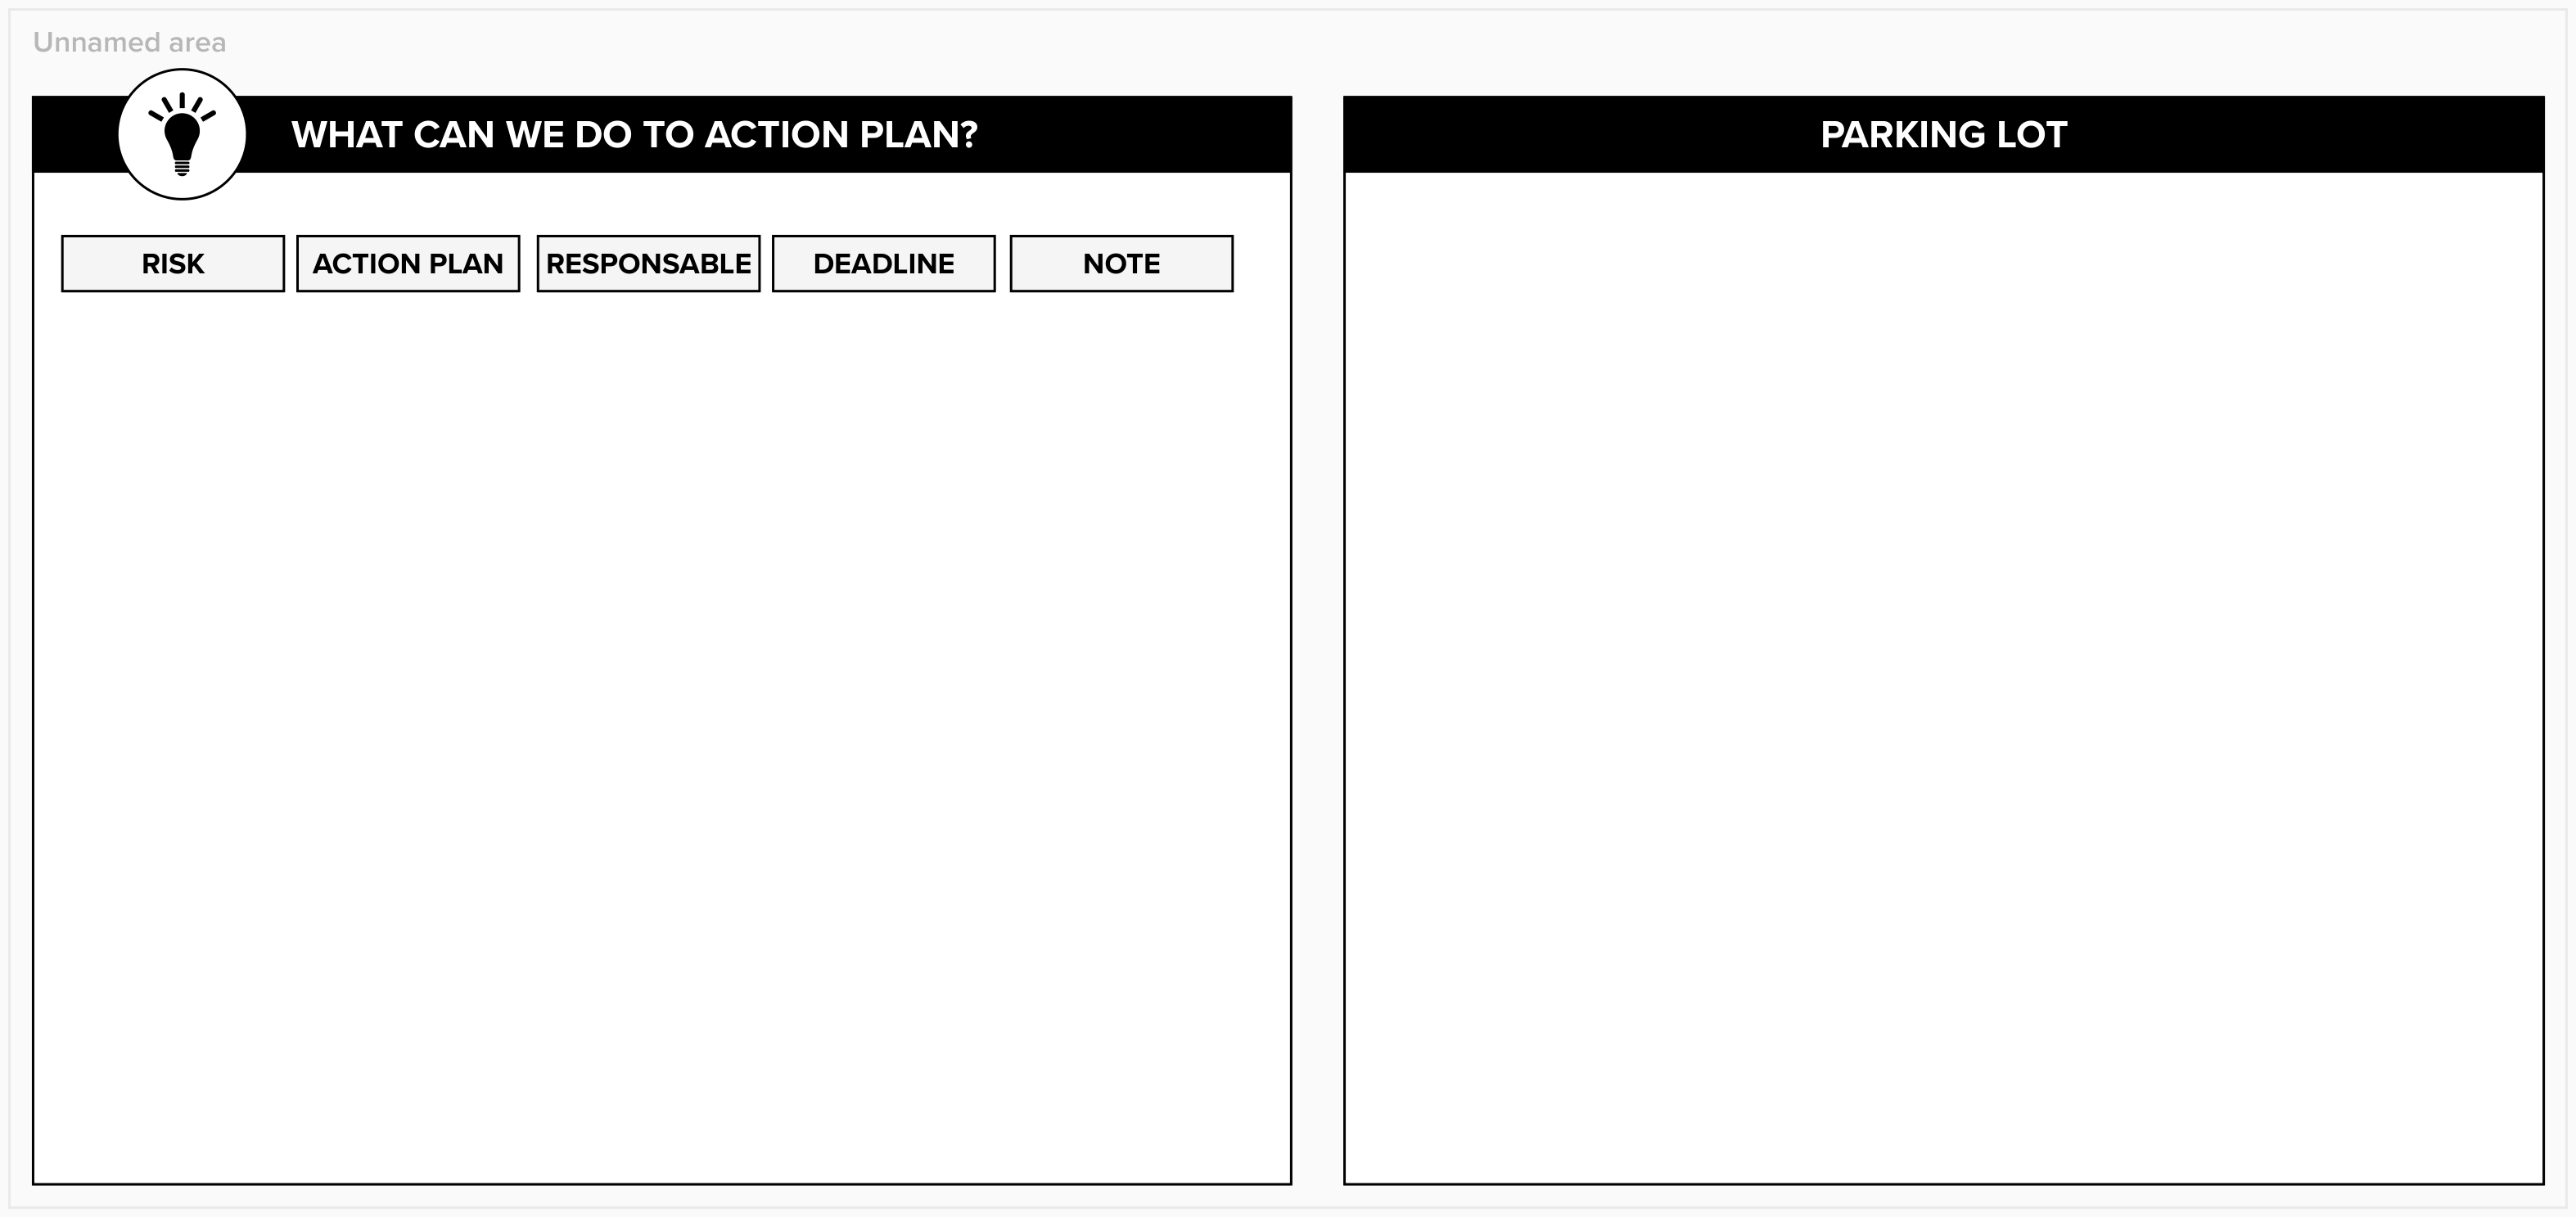 Table of action plan and parking lot